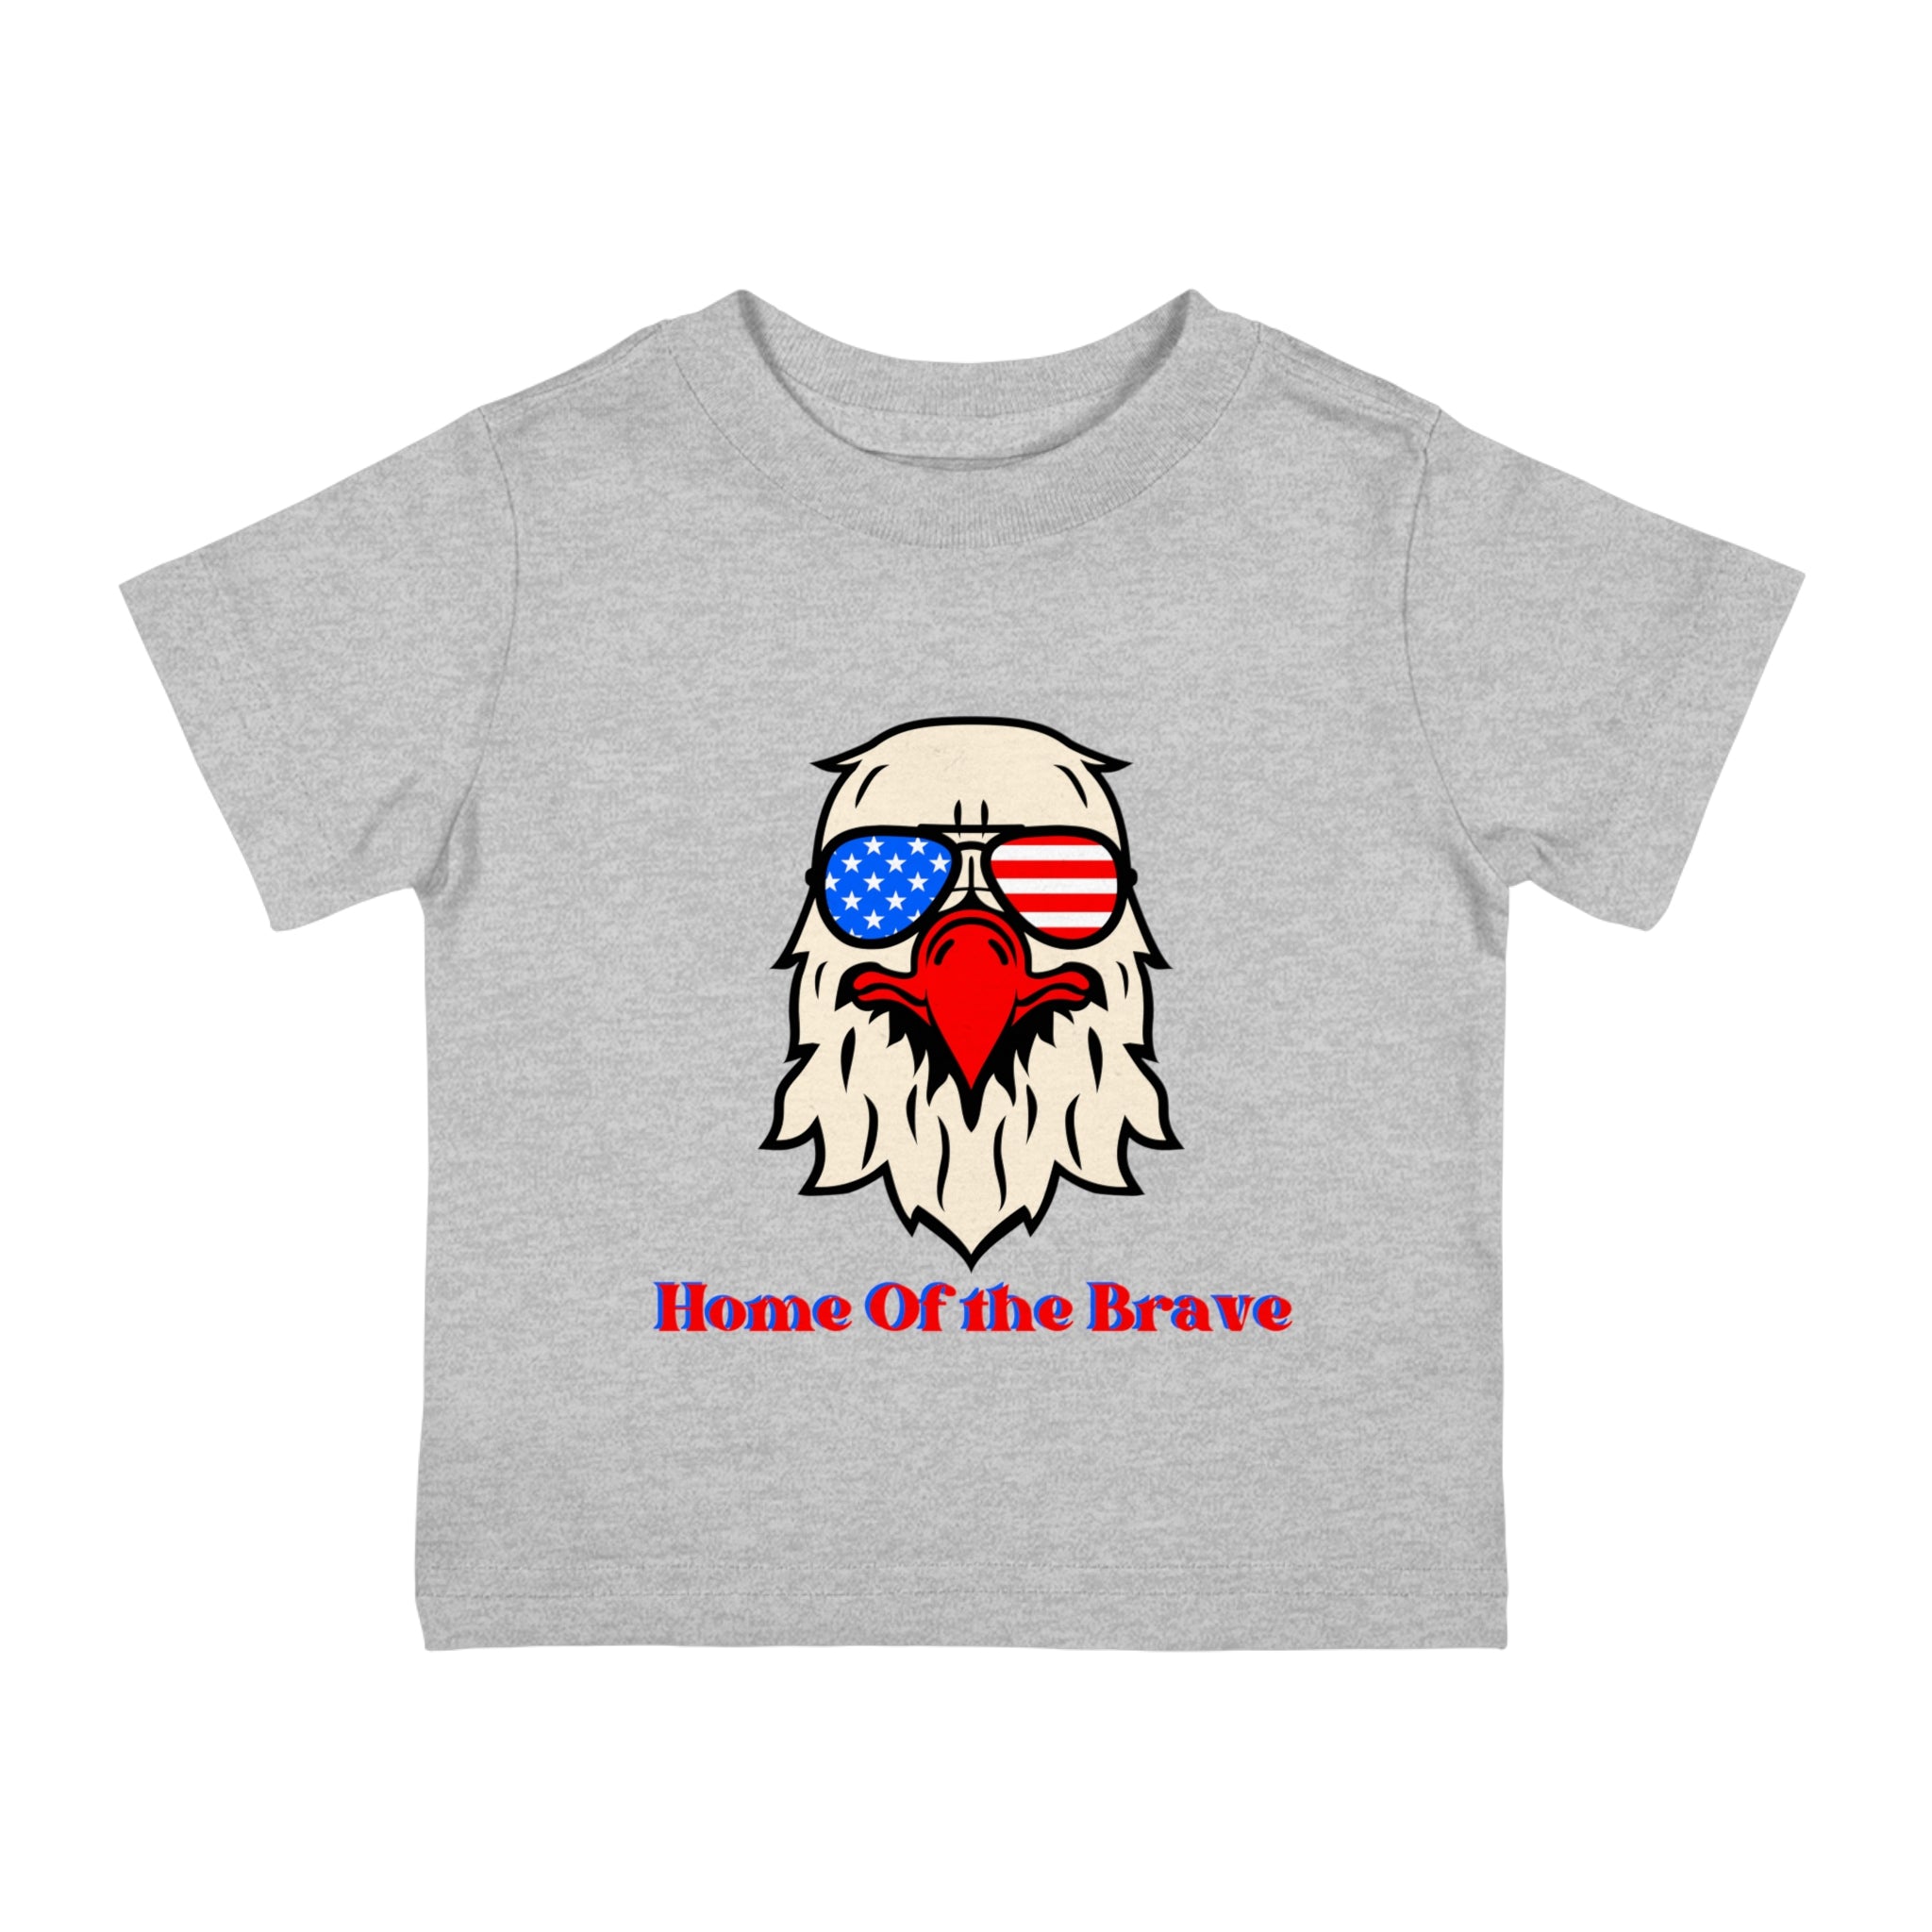 Home Of The Brave Infant Shirt, Baby Tee, Infant Tee